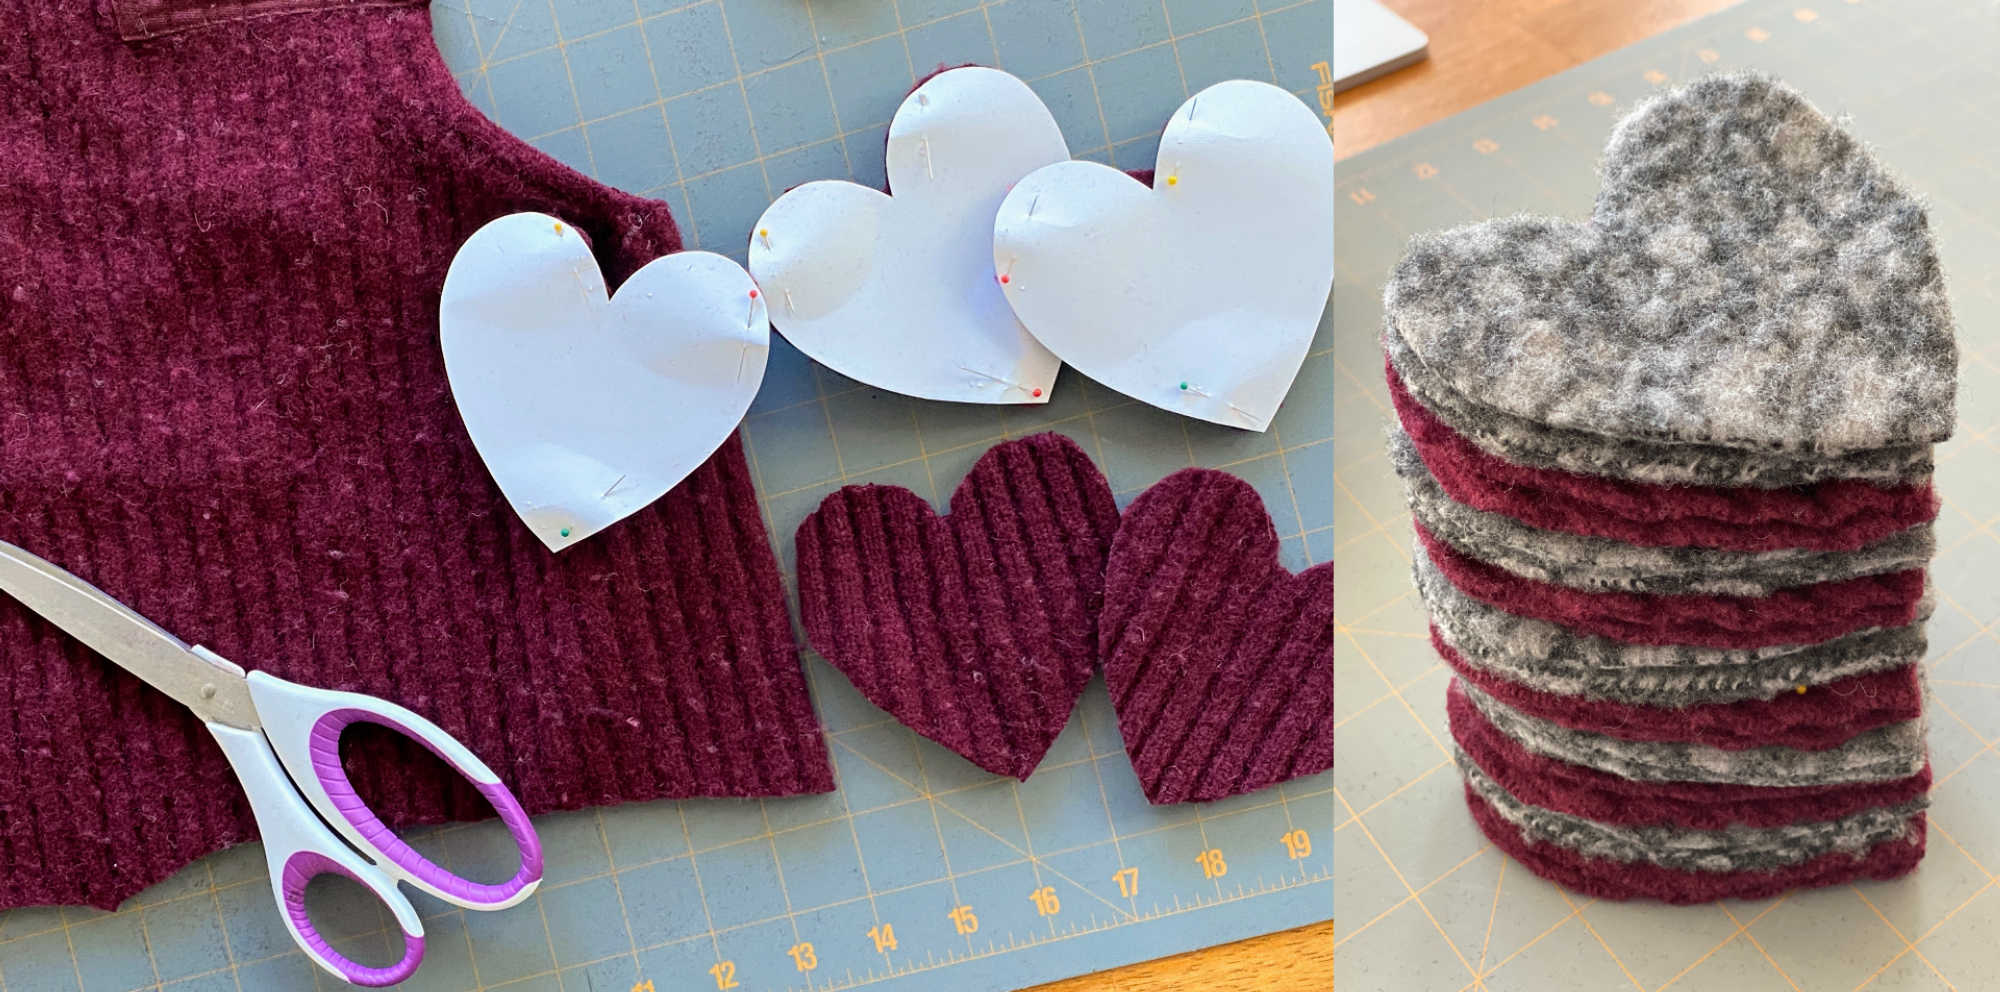 On the left, an image of a maroon sweater. The sleeves have been removed and several hearts have been cut out of the fabric. On the right, a stack of felted hearts, cut out of the grey and maroon sweaters.